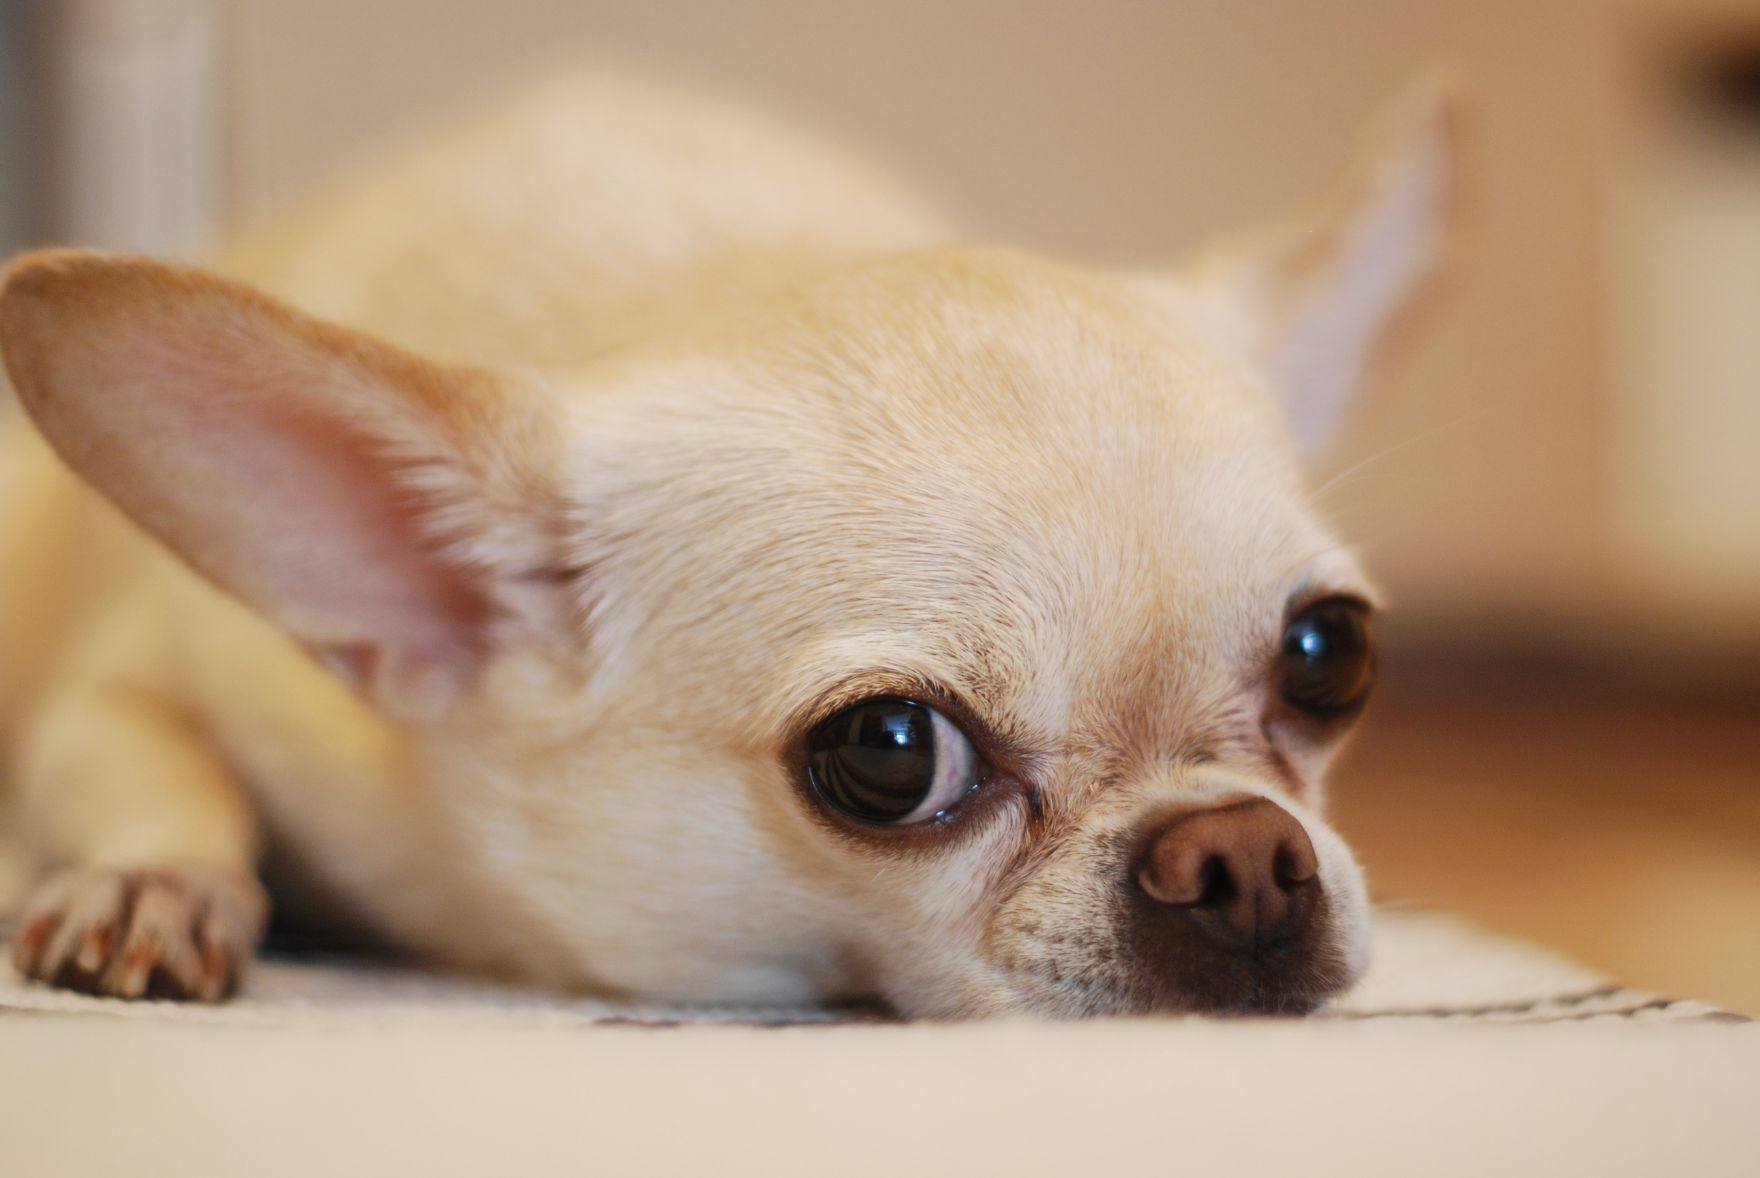 Pint-sized Chihuahuas have polarized pet owners for centuries